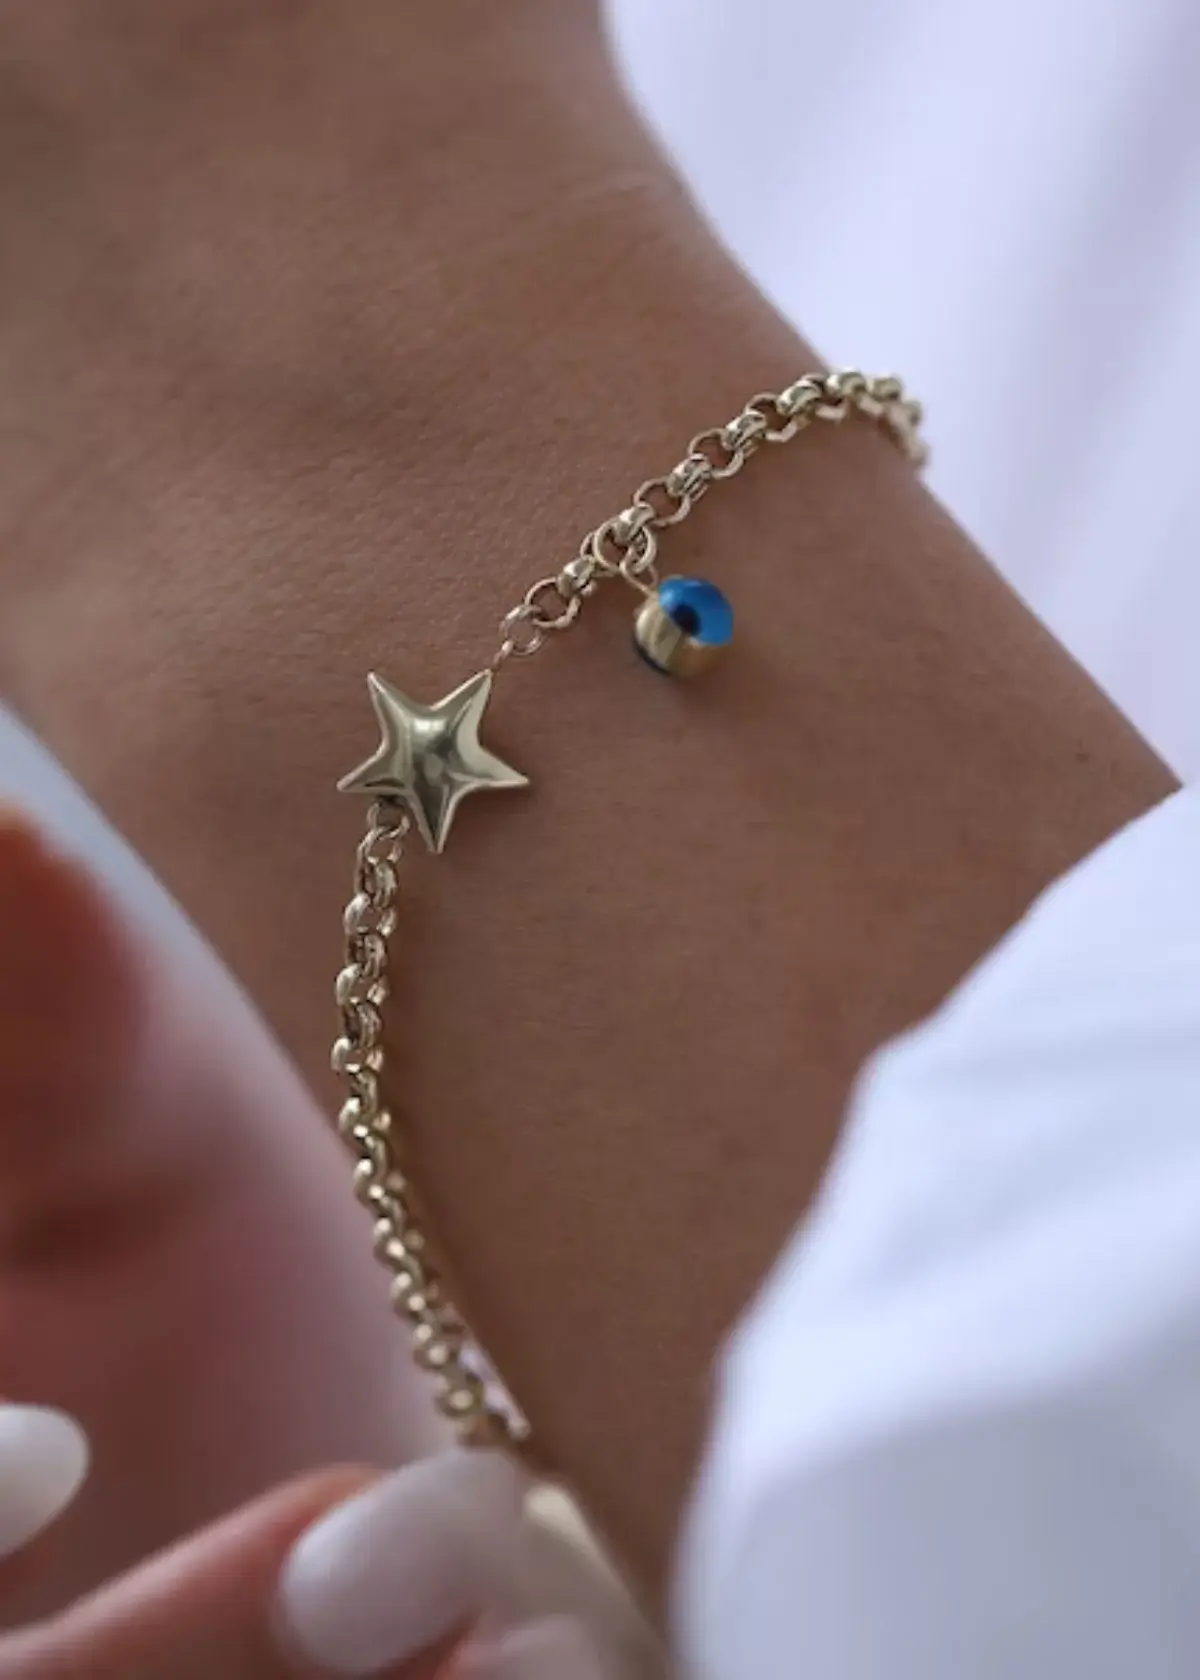 What materials are star bracelets made of?